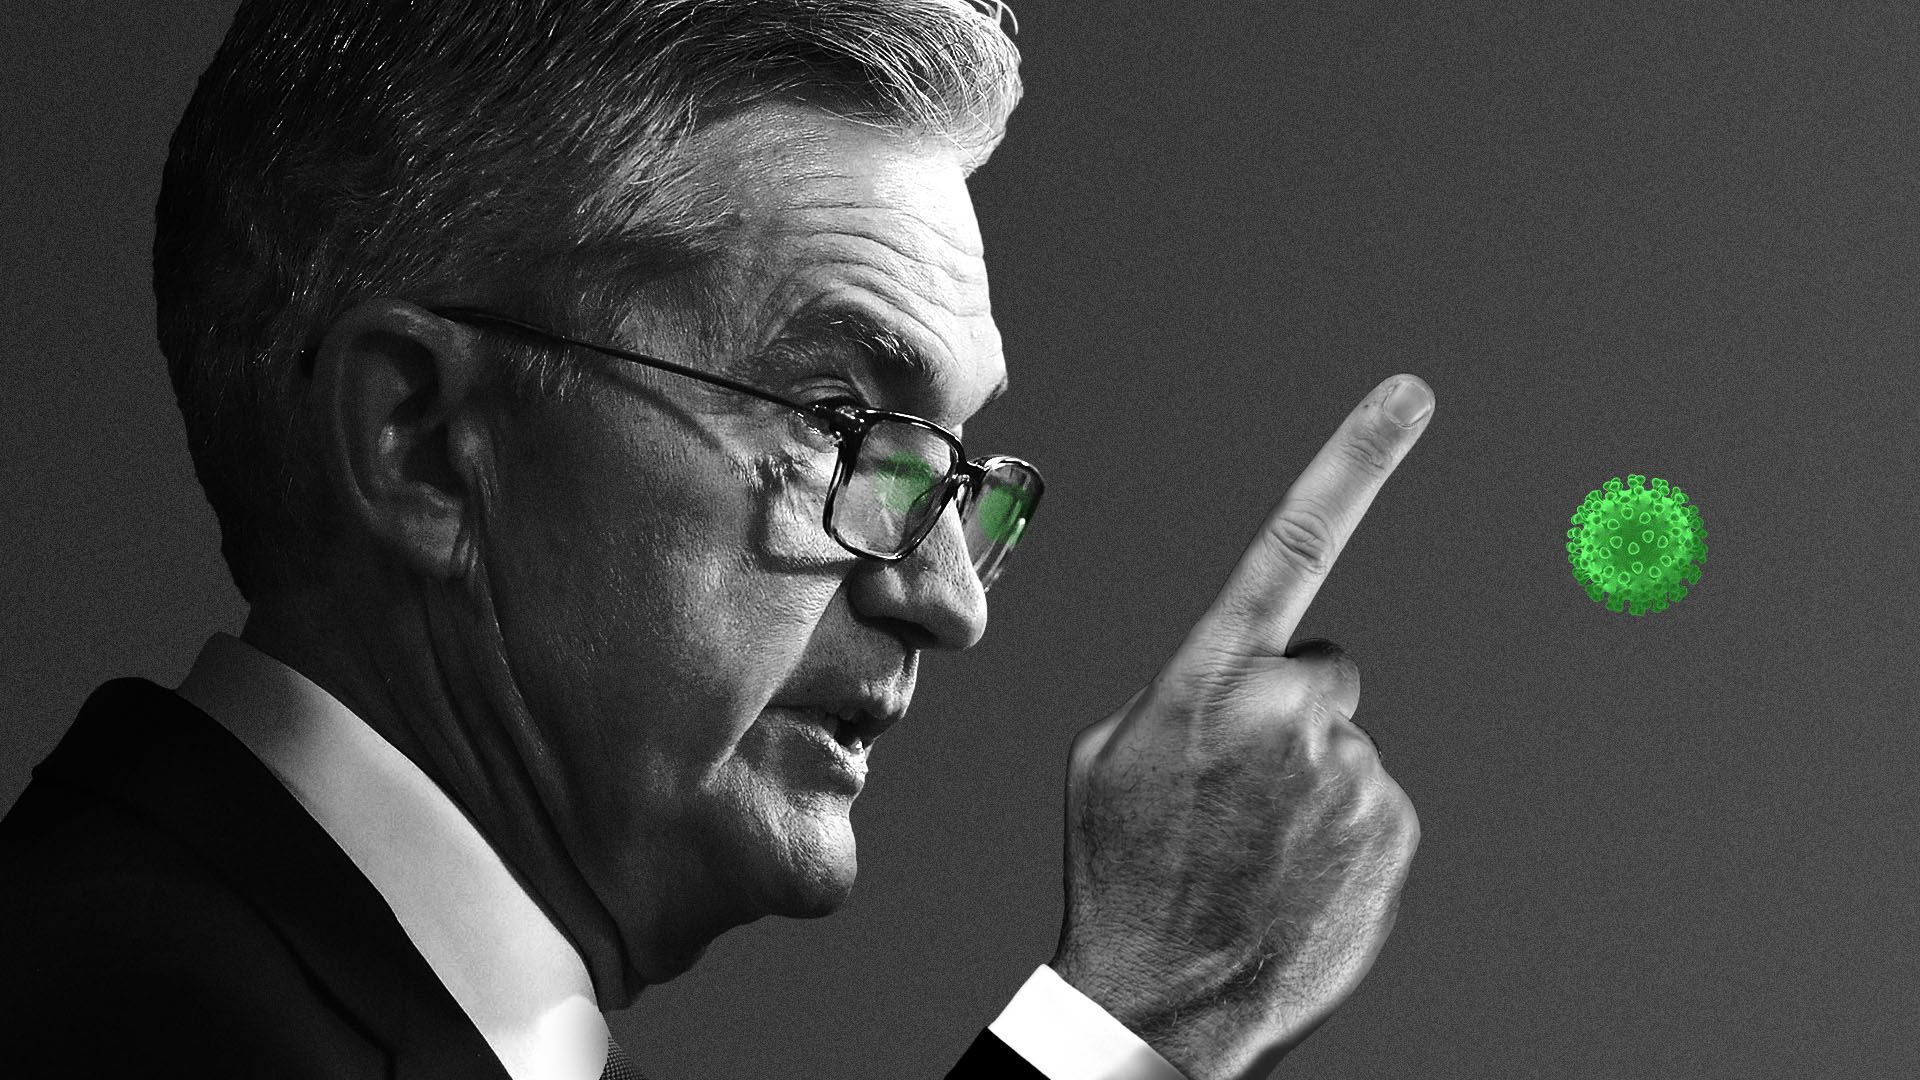 Illustration of Fed Chairman Jerome Powell